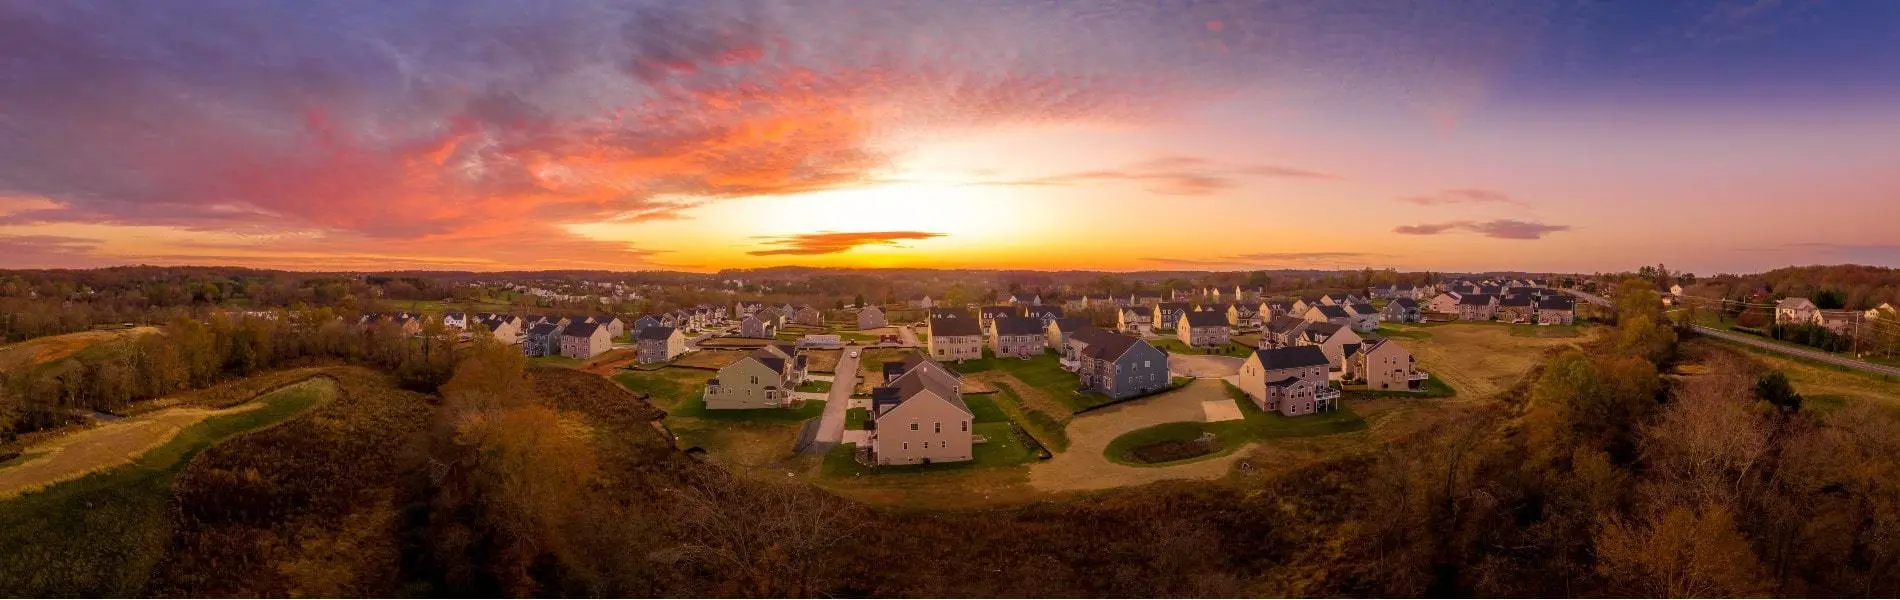 Aerial view of neighborhood typical of the Gambrills, Maryland